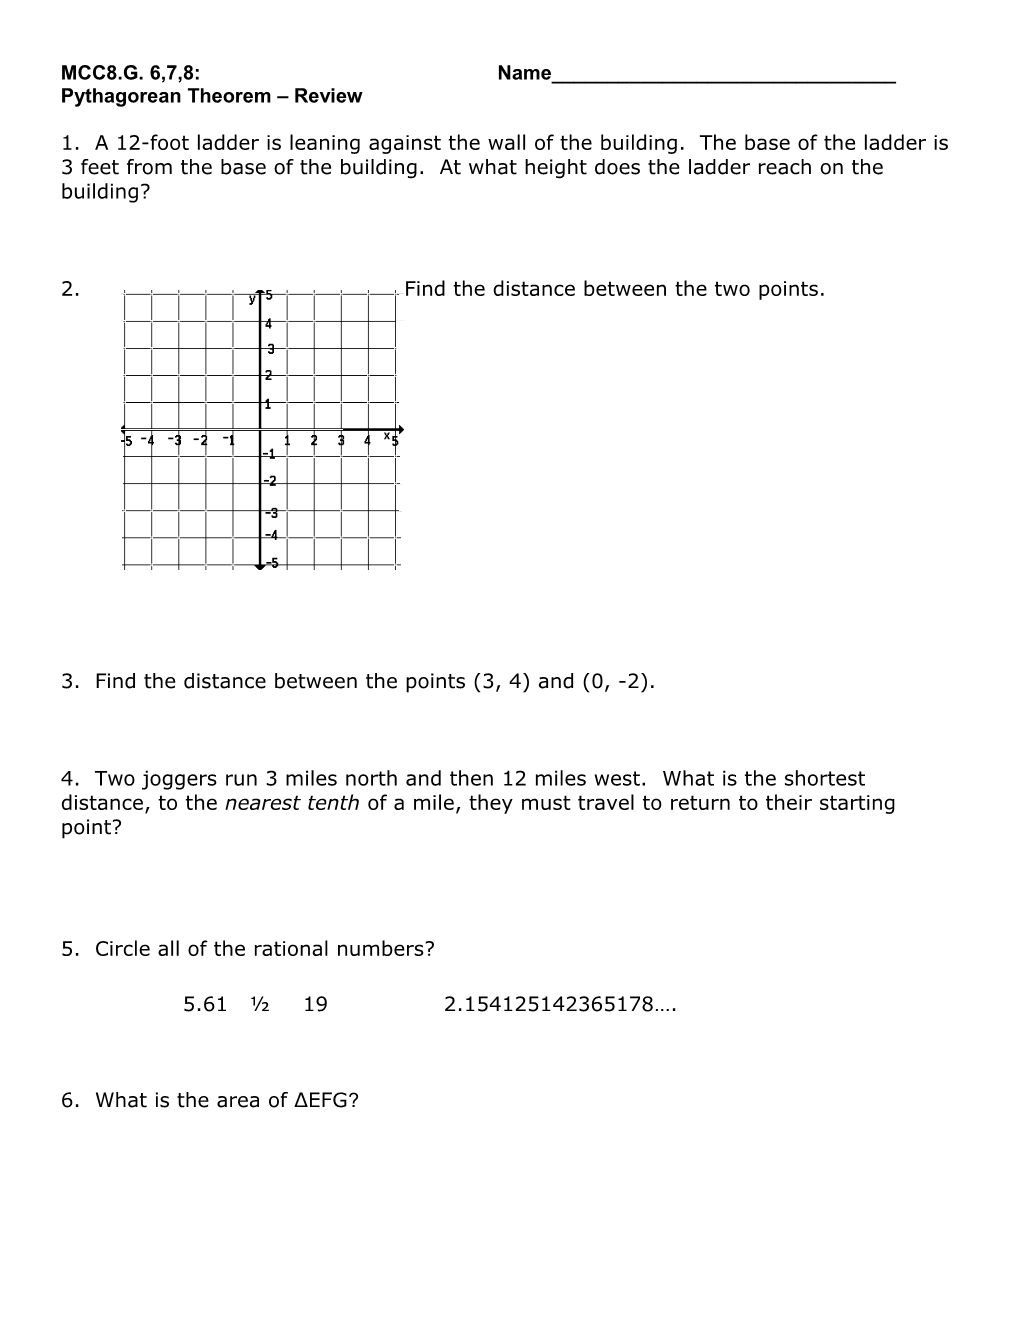 Unit 3 Test: Geometric Applications of Exponents